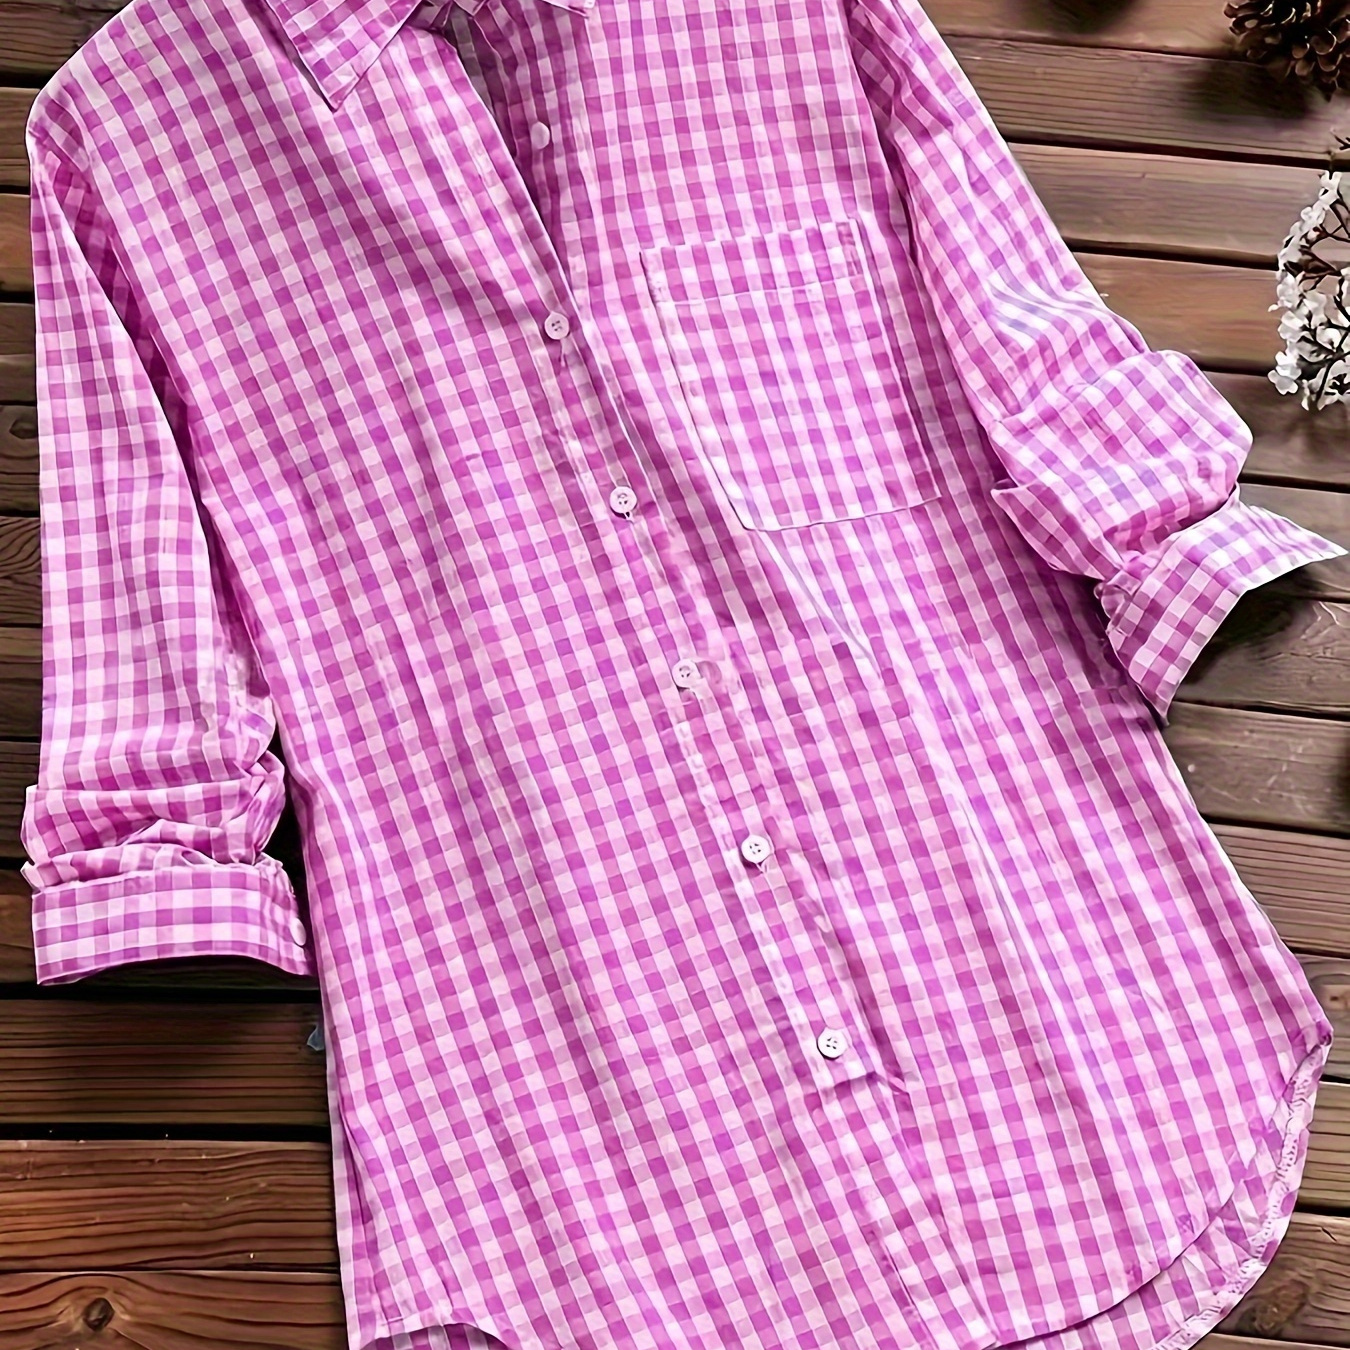 

Plaid Print Open Front Shirt, Lapel Neck Pocket Long Sleeve Cardigans Top For Spring & Fall, Women's Clothing